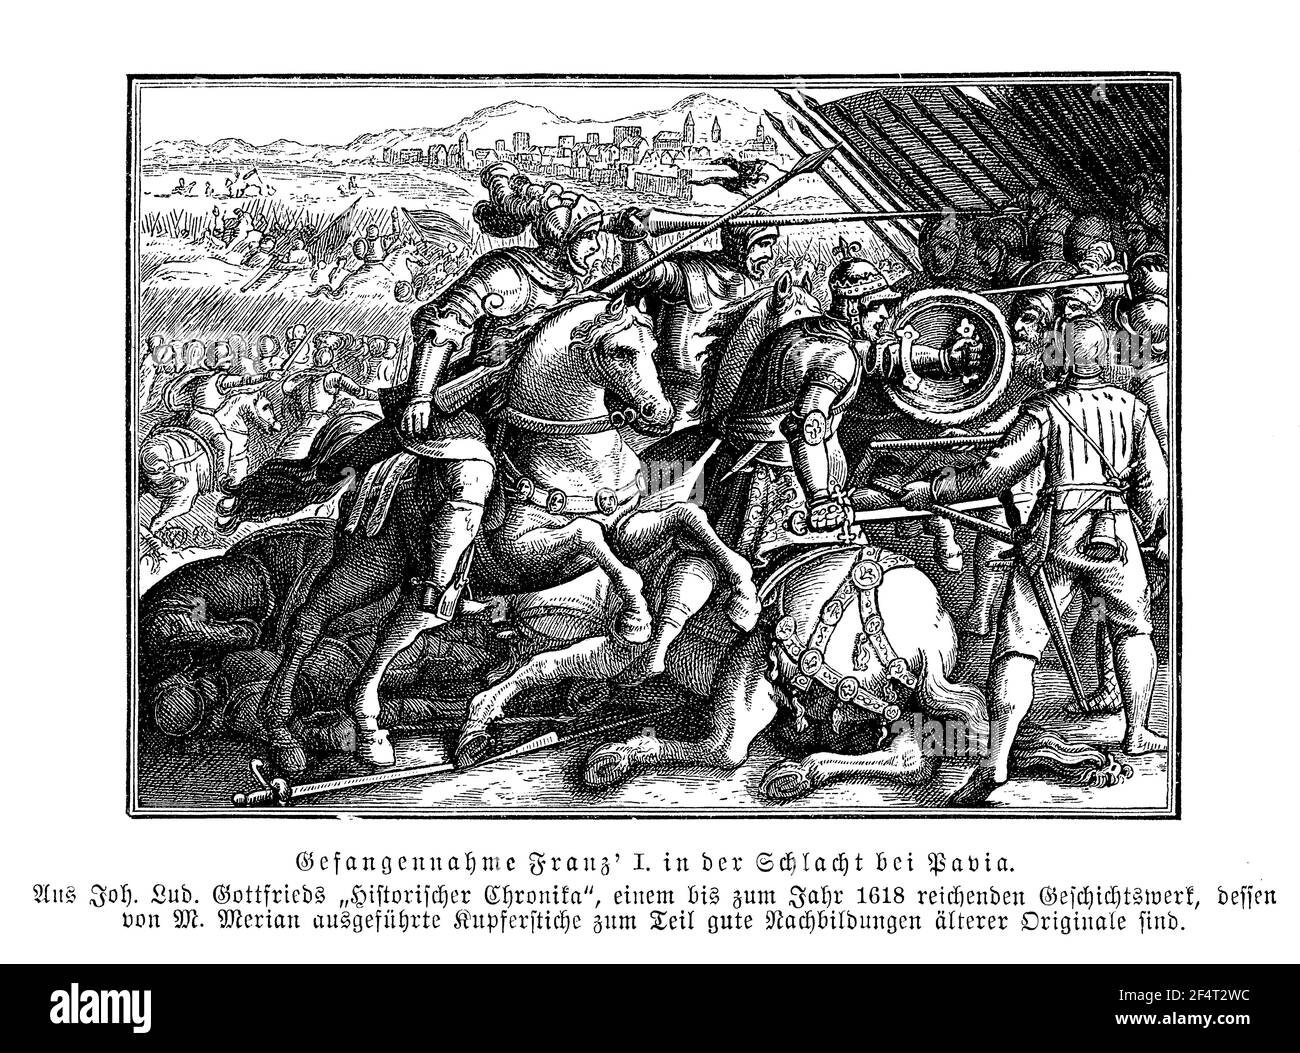 All is lost save honour,Francis I king of France defeated and taken as prisoner at the battle of Pavia during the Italian war against Charles V Holy Roman Emperor, 1525 Stock Photo